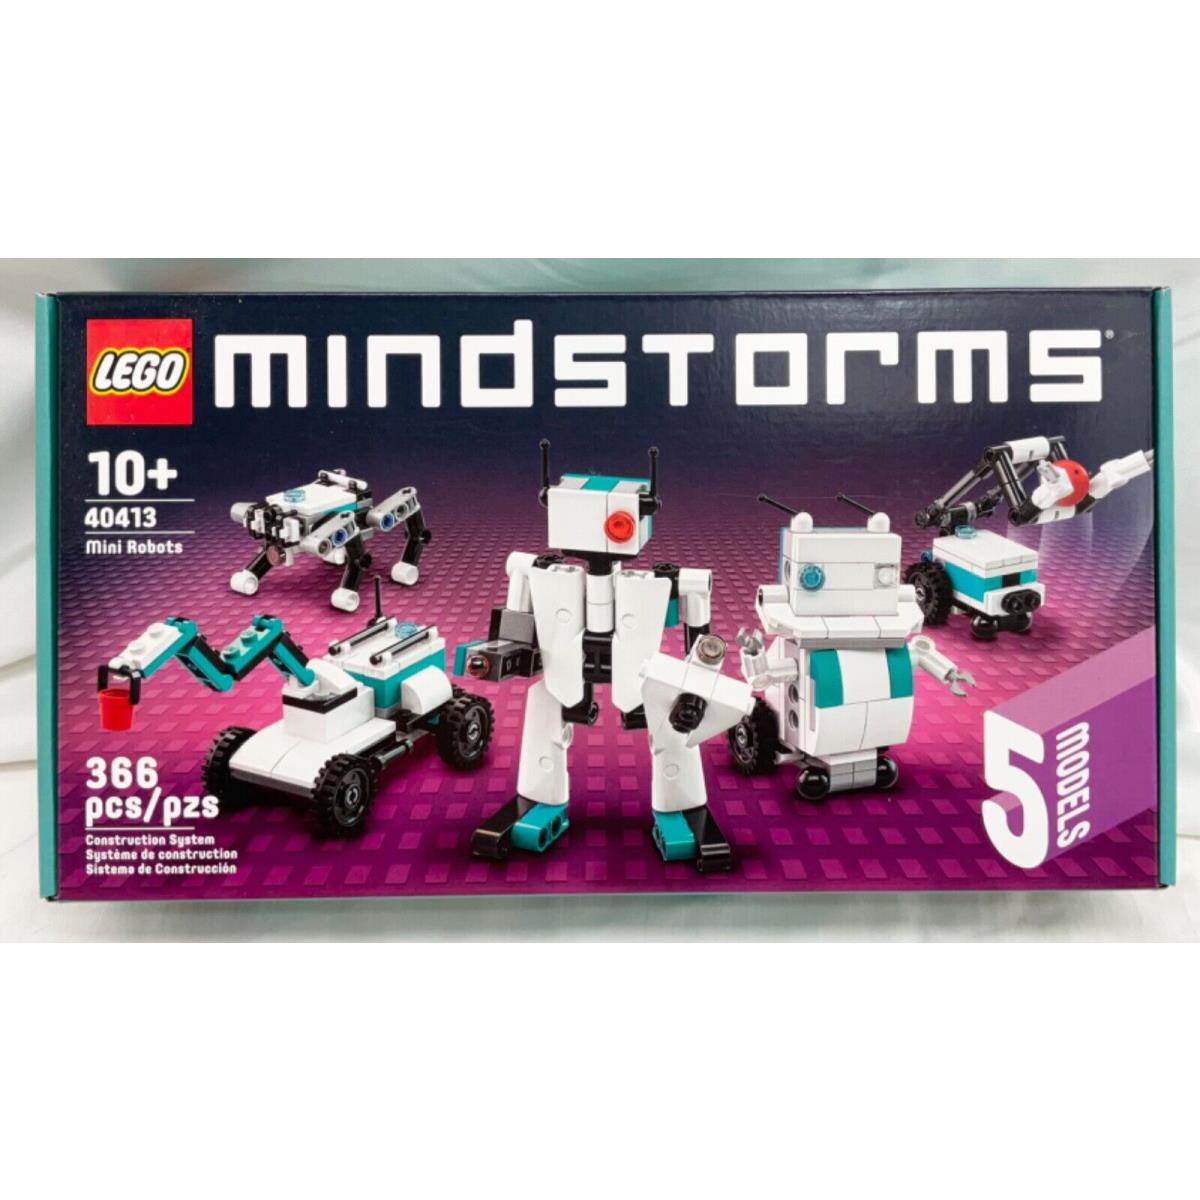 Lego Mindstorms 5 Mini Robots 366 Pieces Set 40413 Promotional Gift Retired Edt